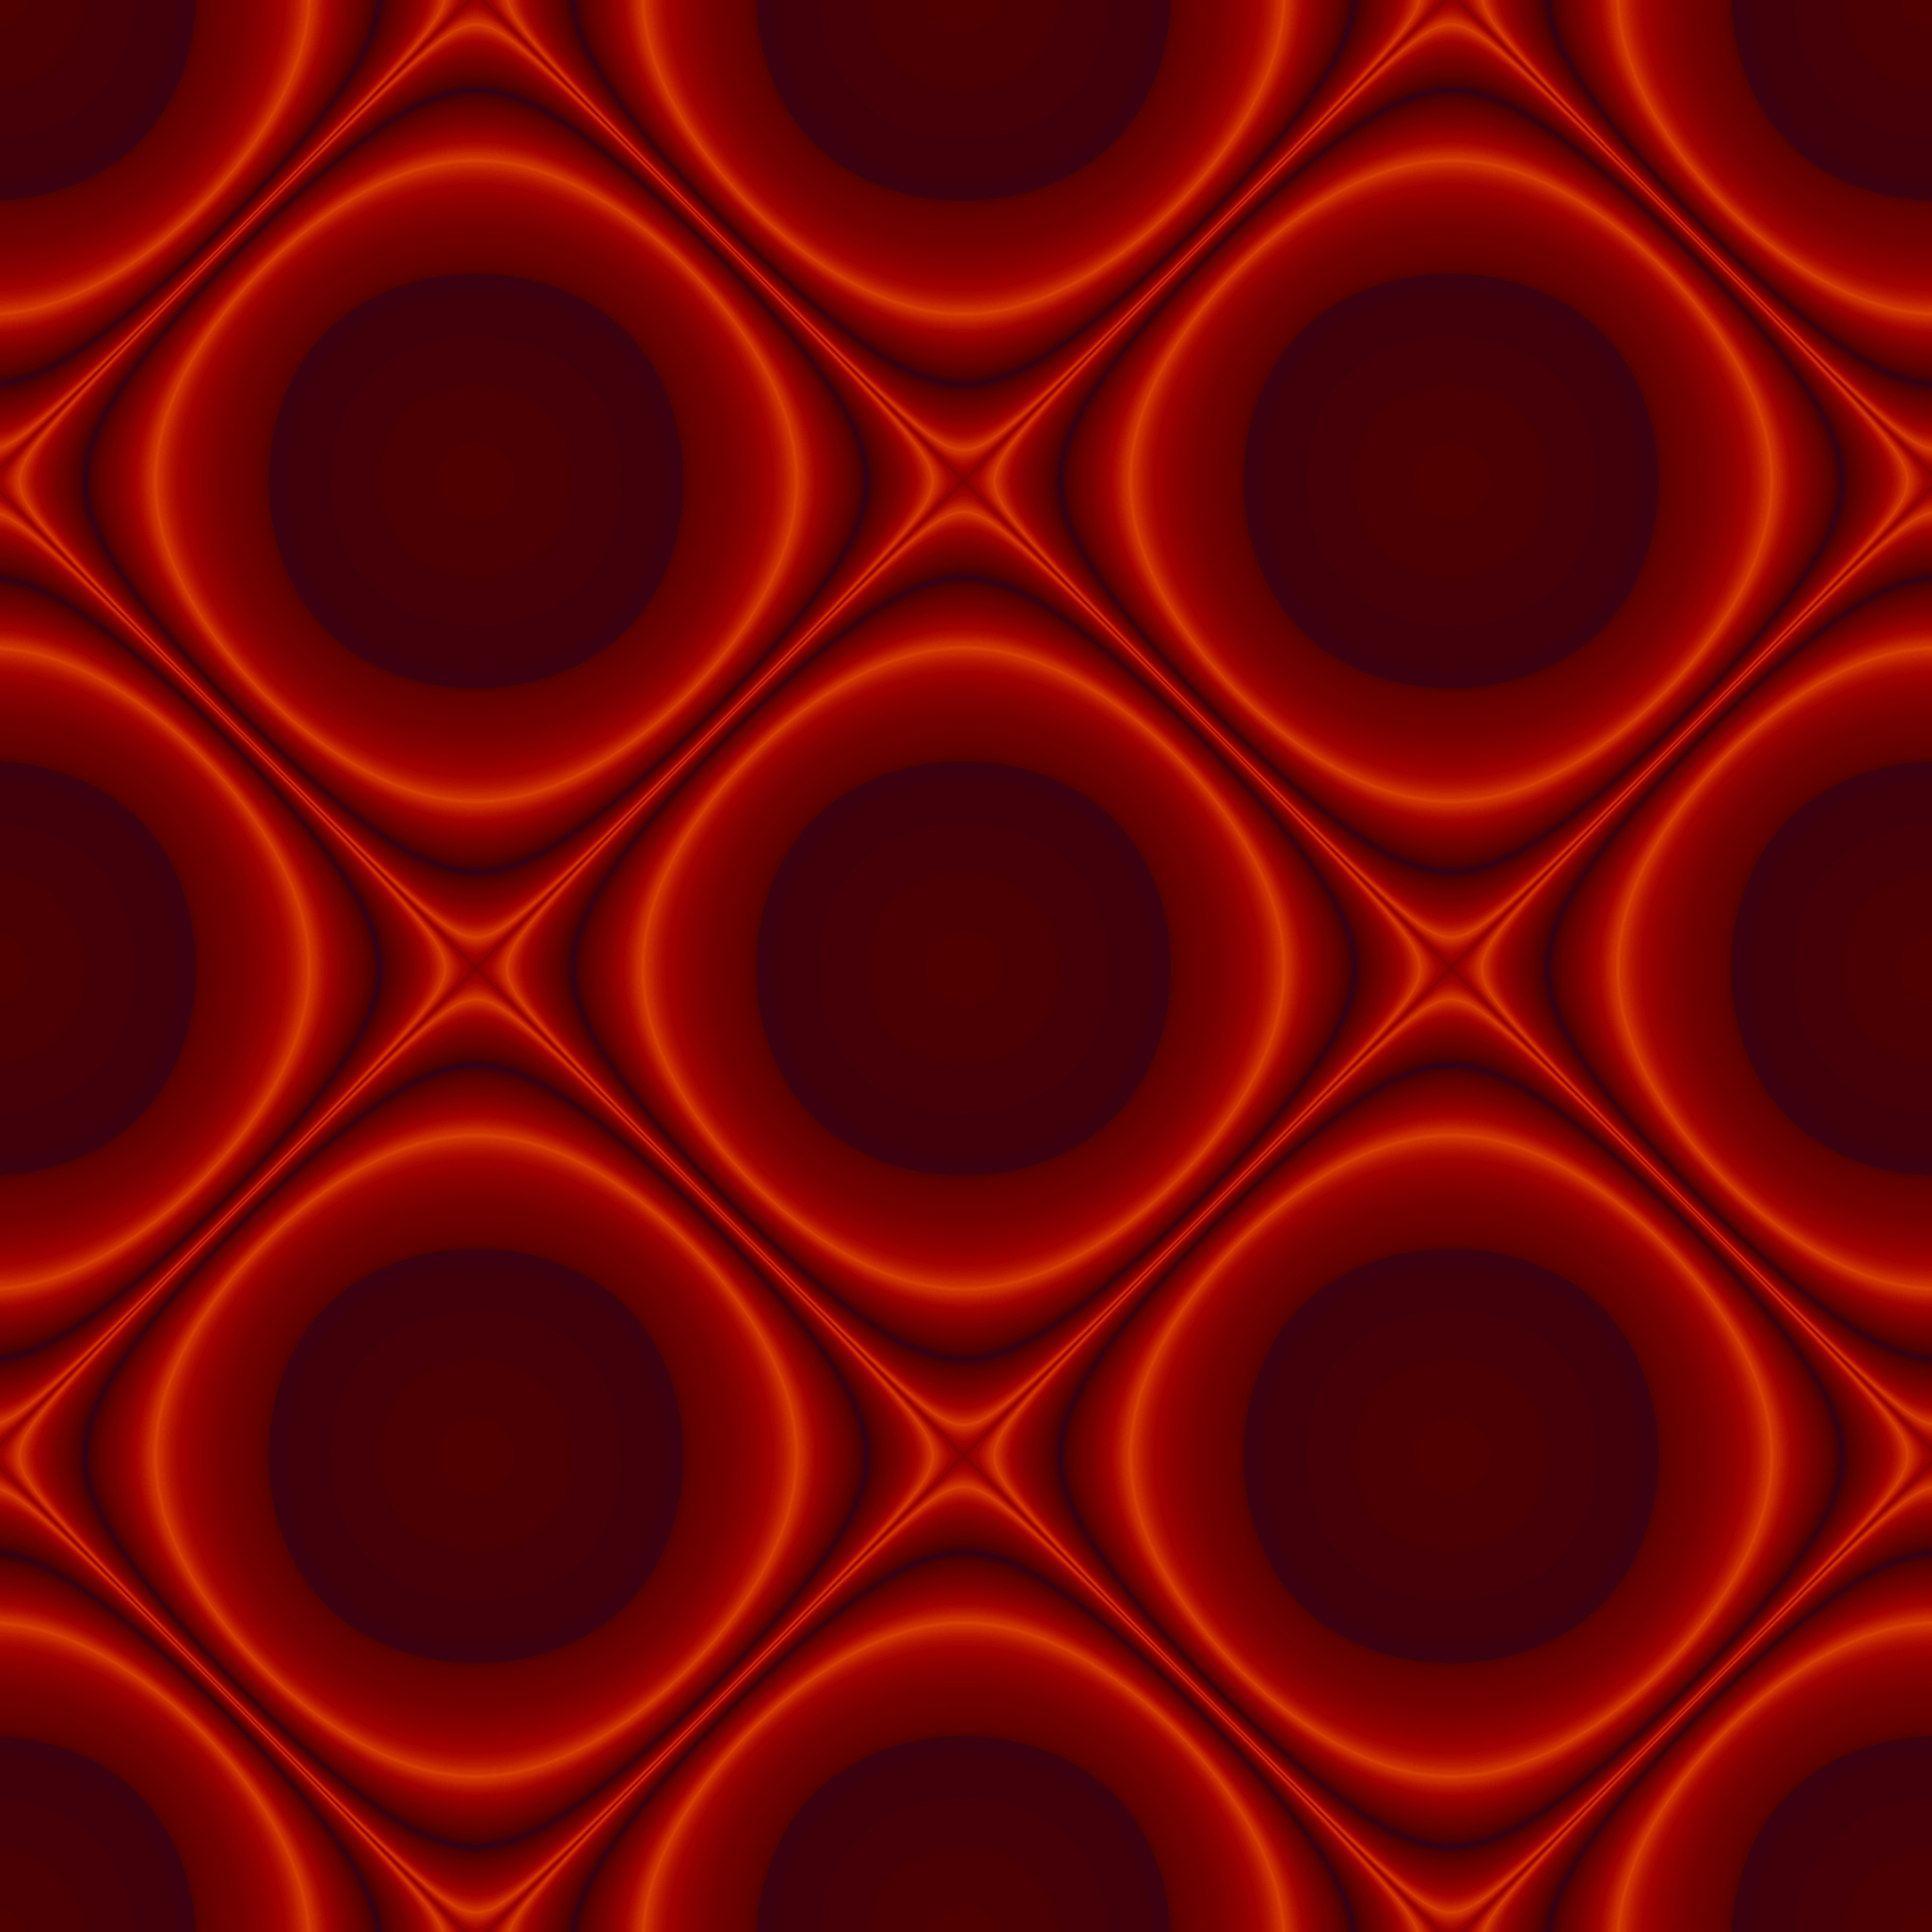 iPad Wallpapers Abstract Pattern Design Red Ipad Wallpaper 3208x3208 px